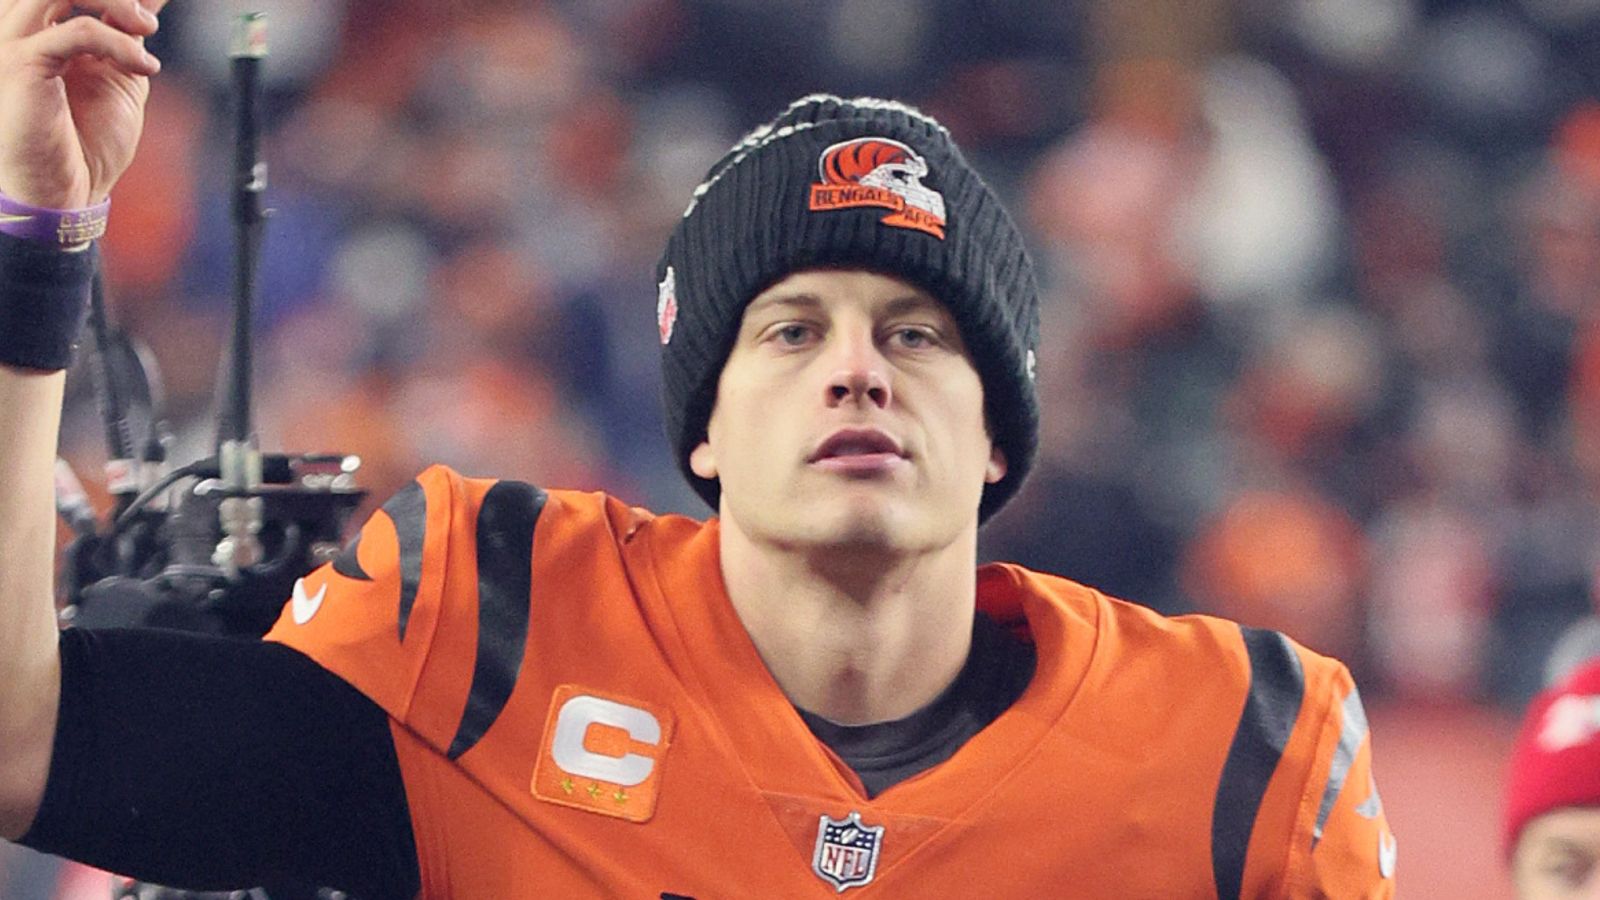 Joe Burrow: Cincinnati Bengals quarterback becomes NFL's highest paid player after agreeing to new $55m-a-year deal | NFL News